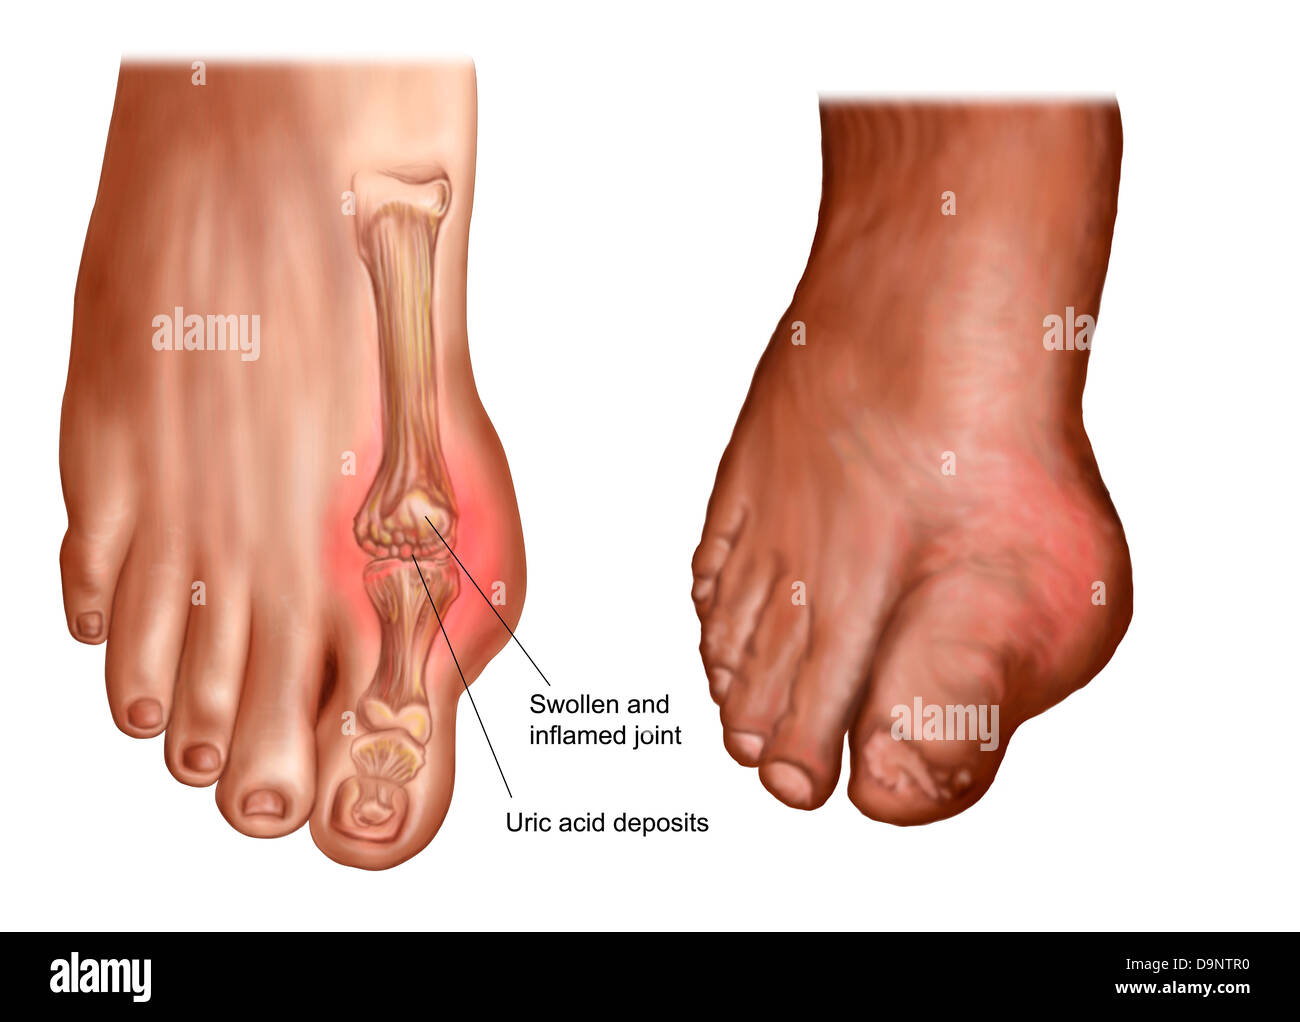 Anatomy of a swollen foot. Stock Photo